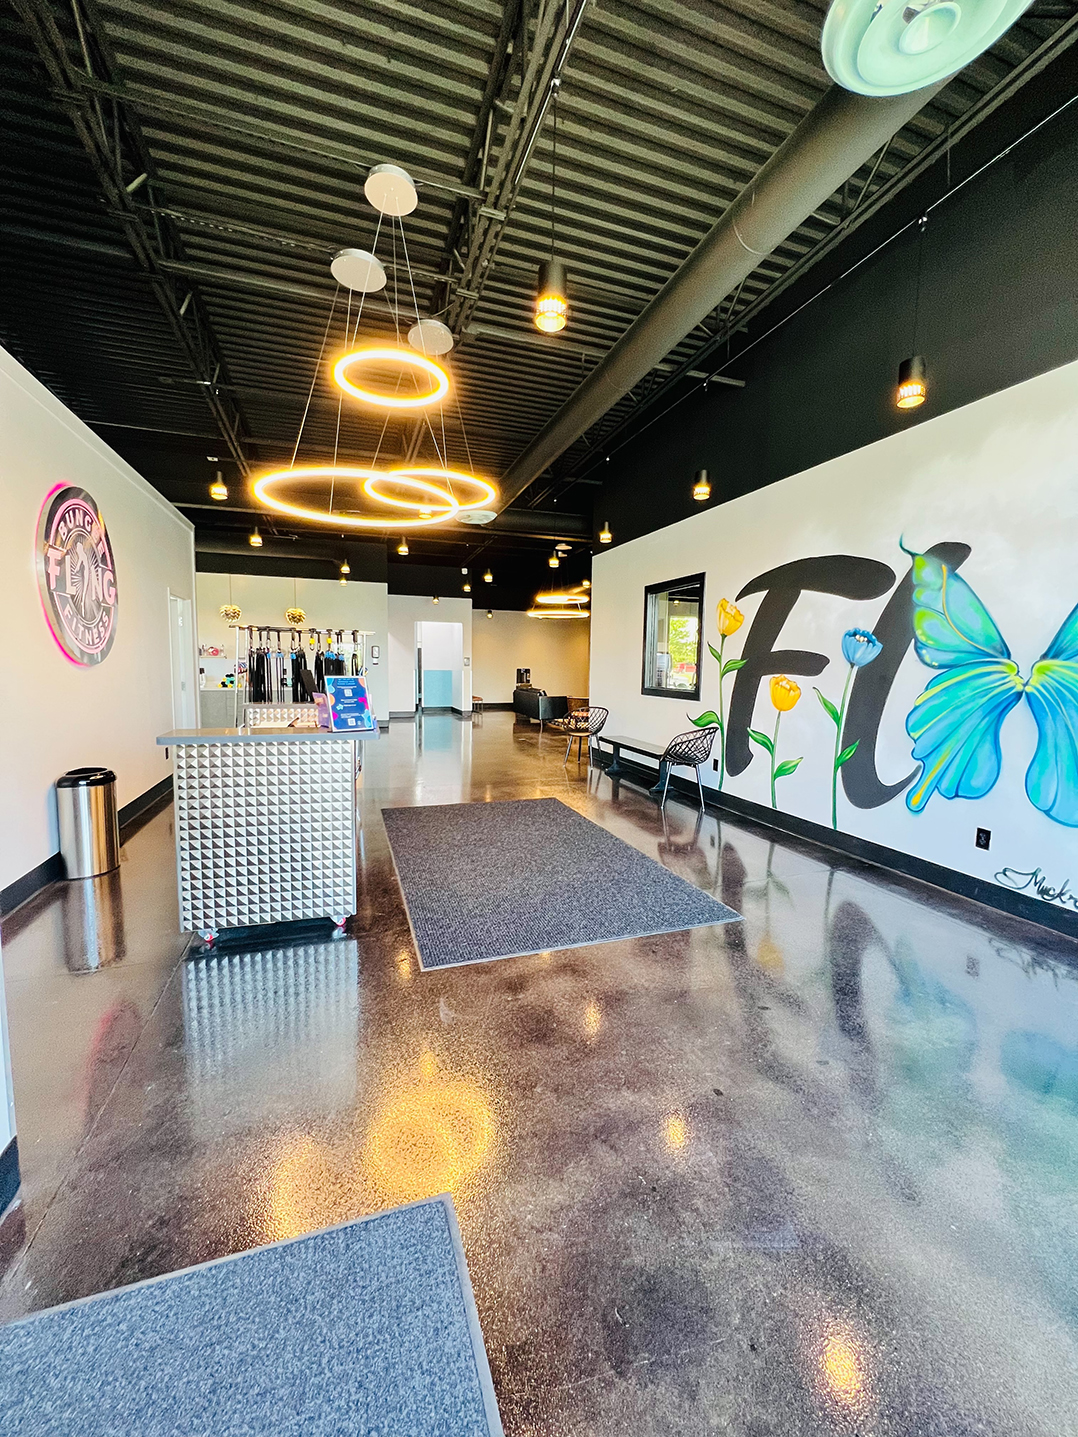 Bungee fitness facility opens in Noblesville • Current Publishing